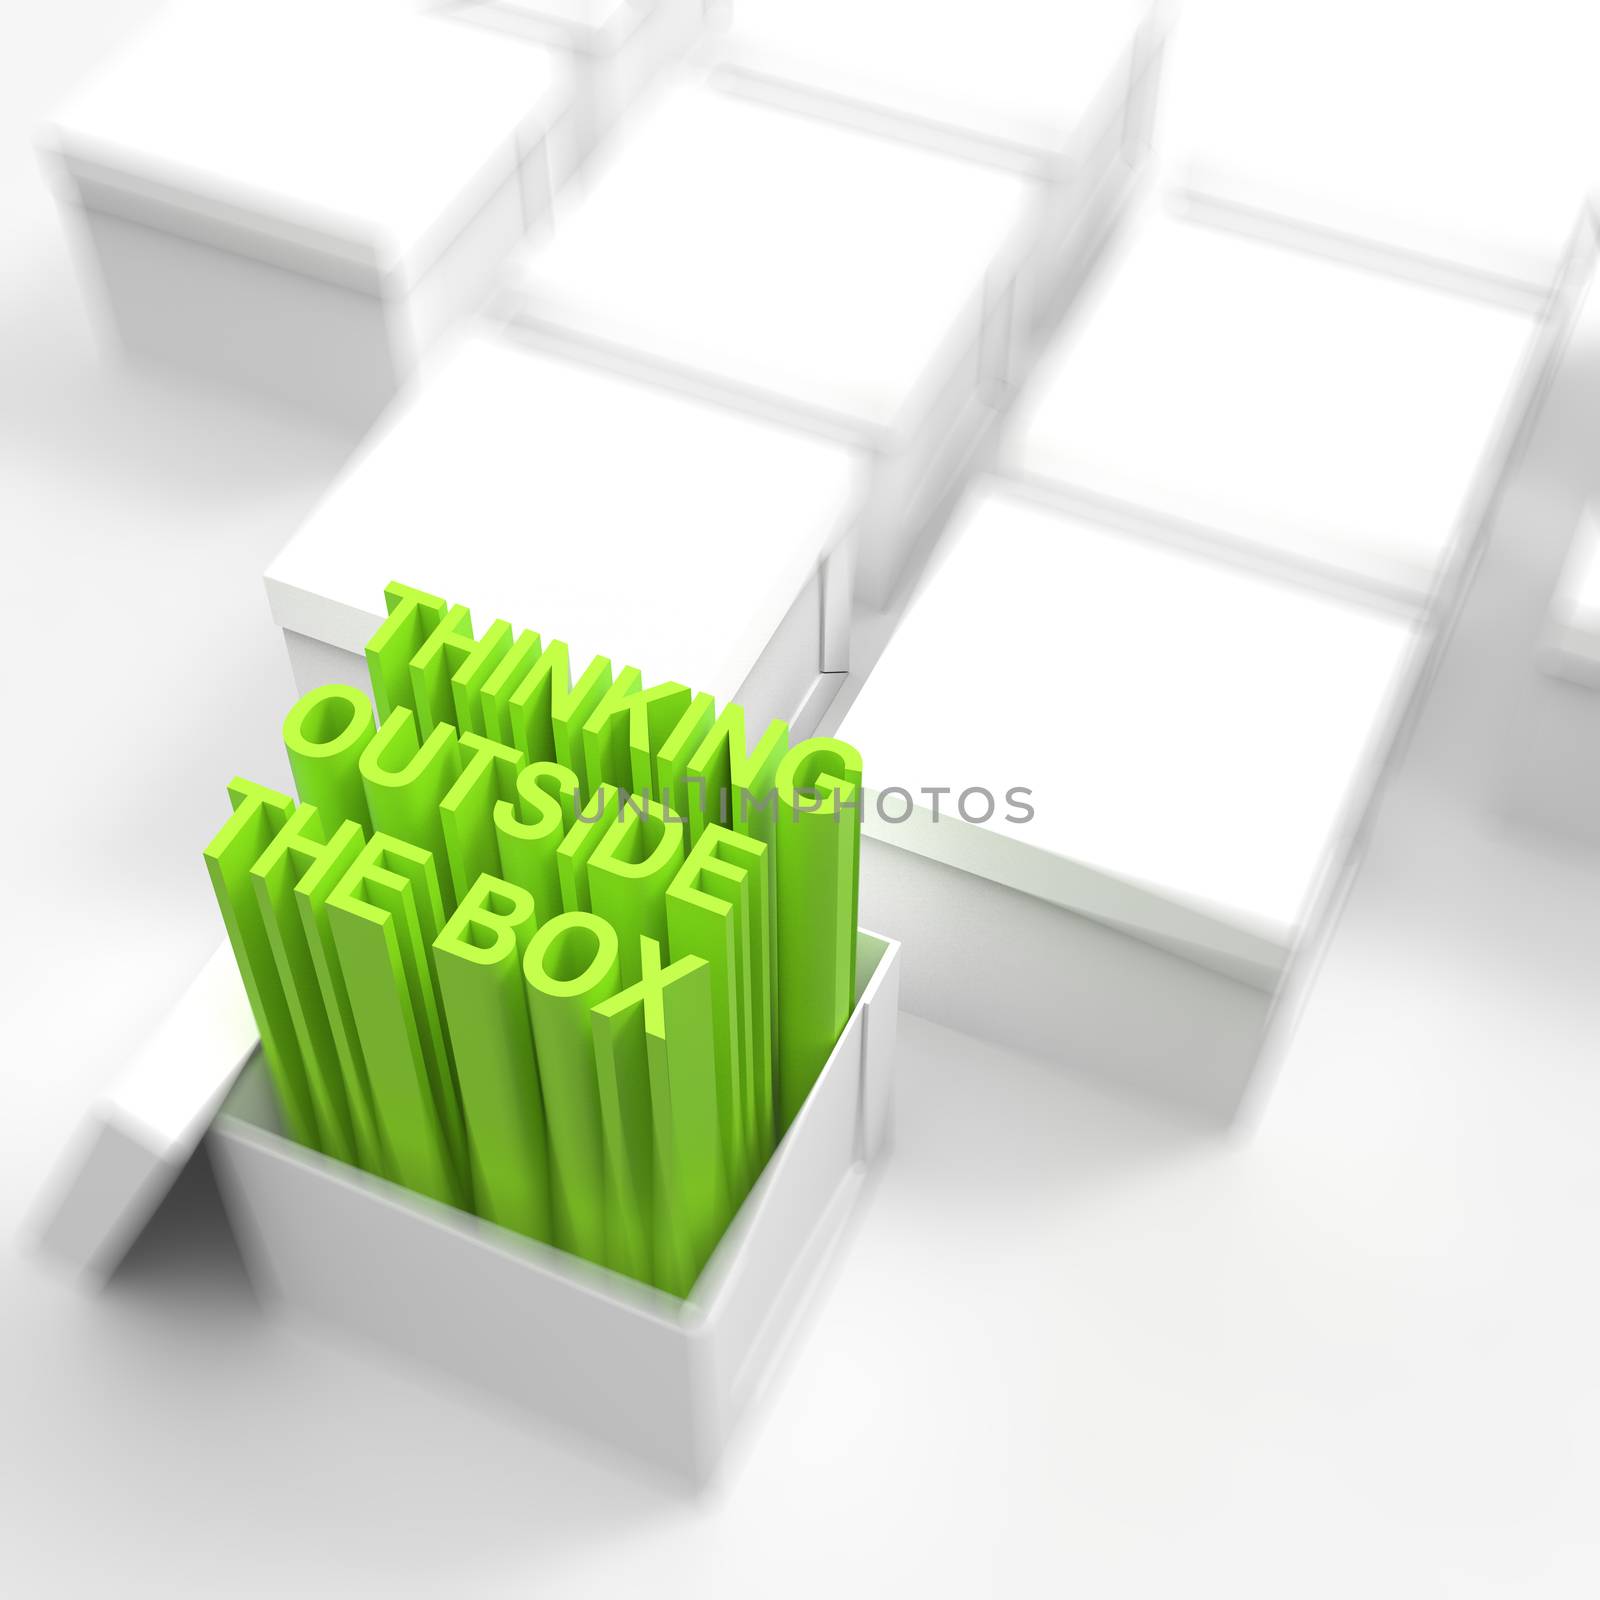 3d open box with extrude text as thinking outside the box concep by everythingpossible